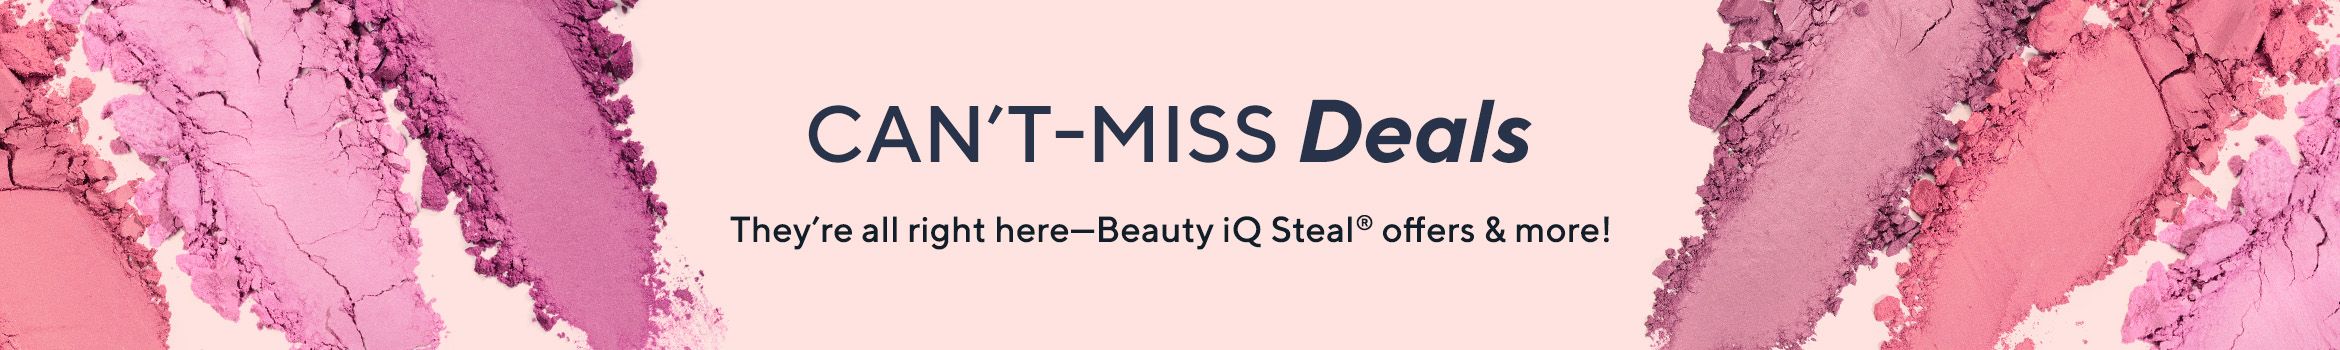 Can't-Miss Deals They're all right here—Beauty iQ Steal® offers & more!